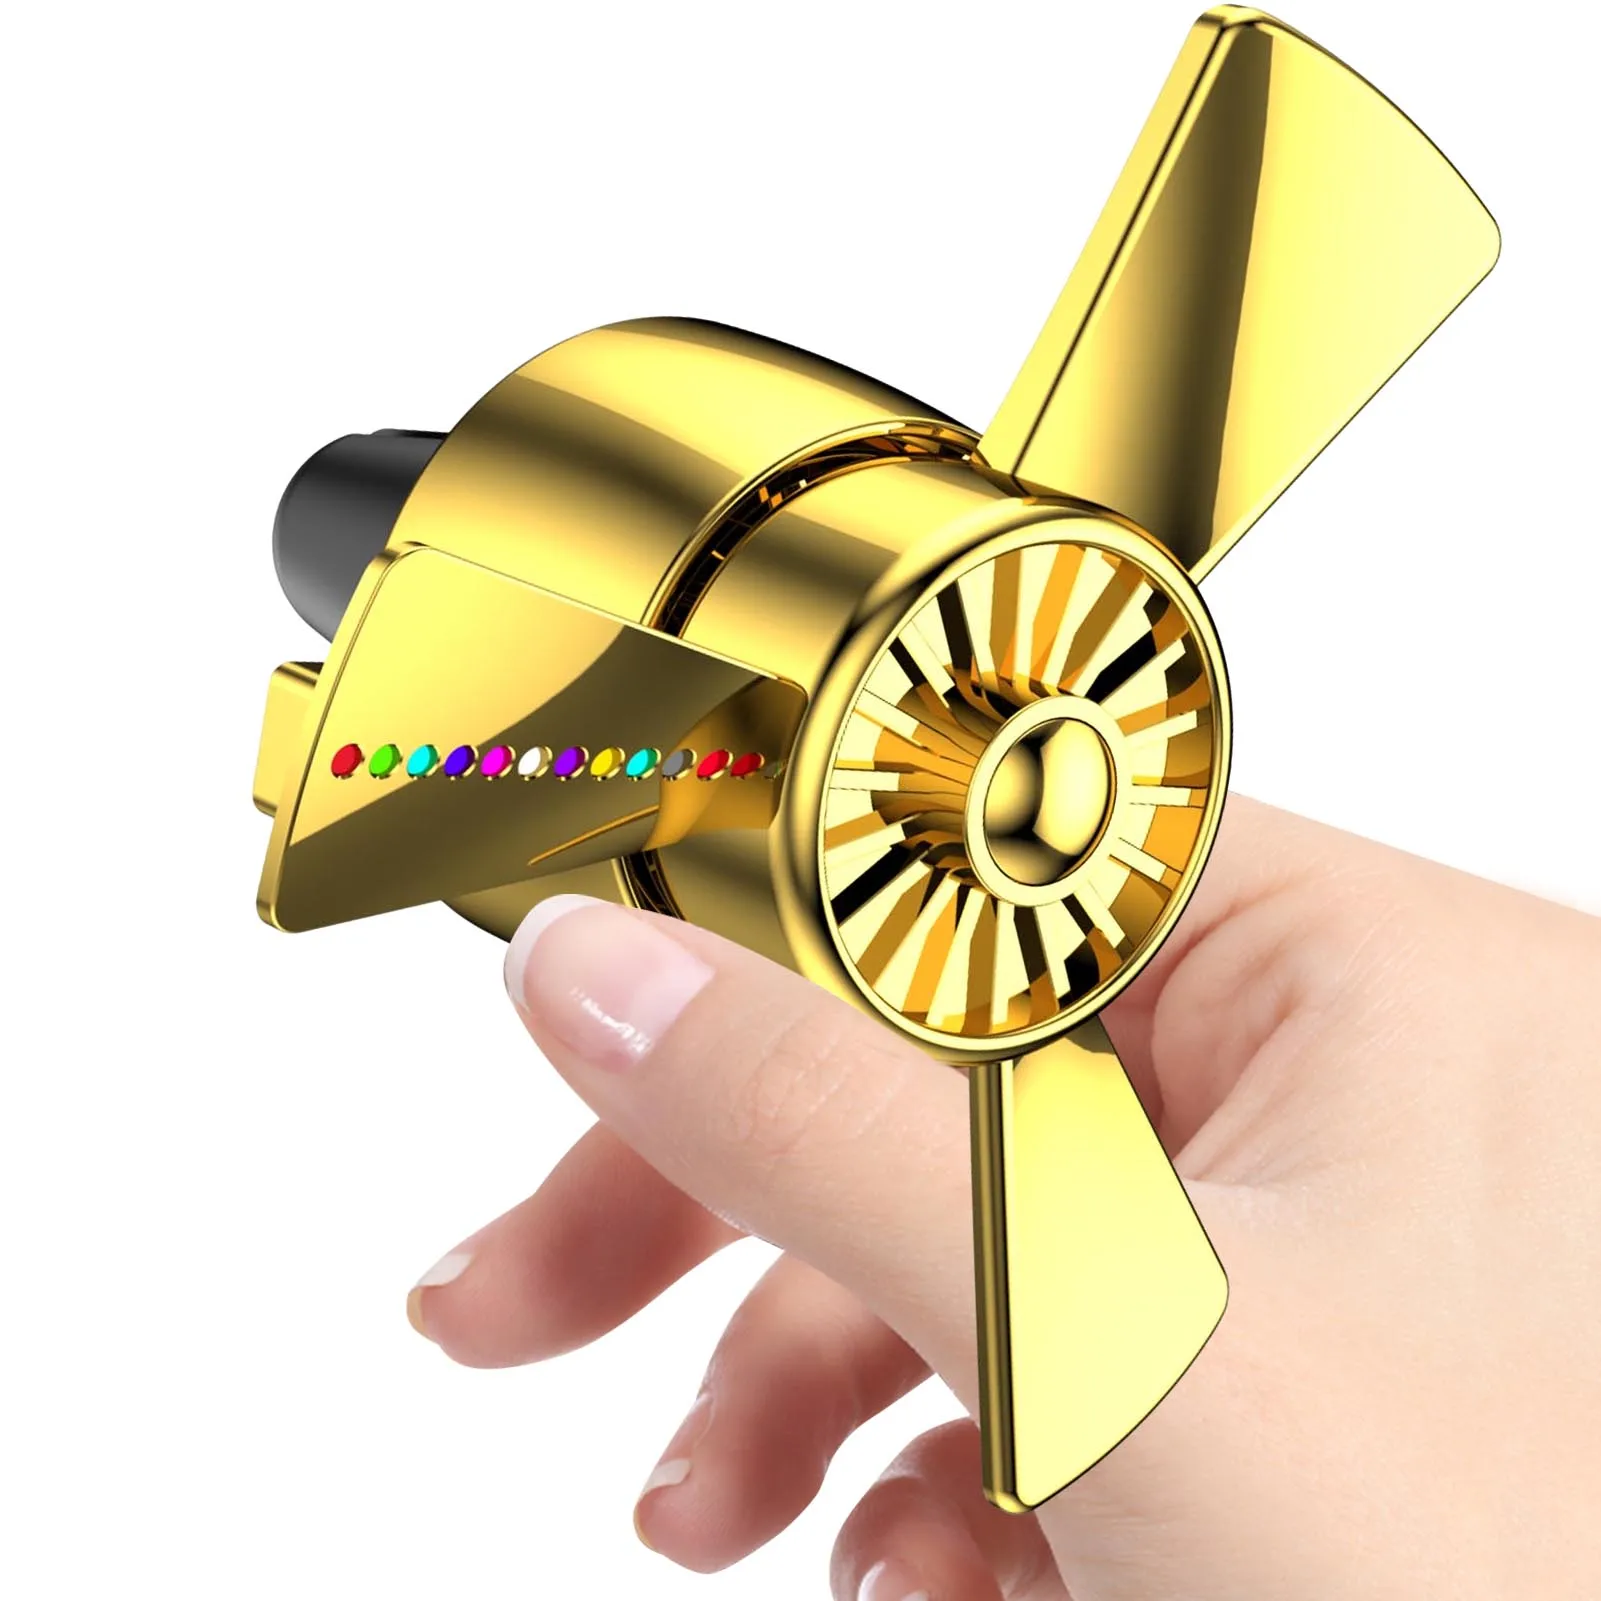 

Propeller Car Air Fresheners with LED Light Car Fresheners Vent Clips Essential Perfume Diffuser Fan USB Charging Cologne Lemon